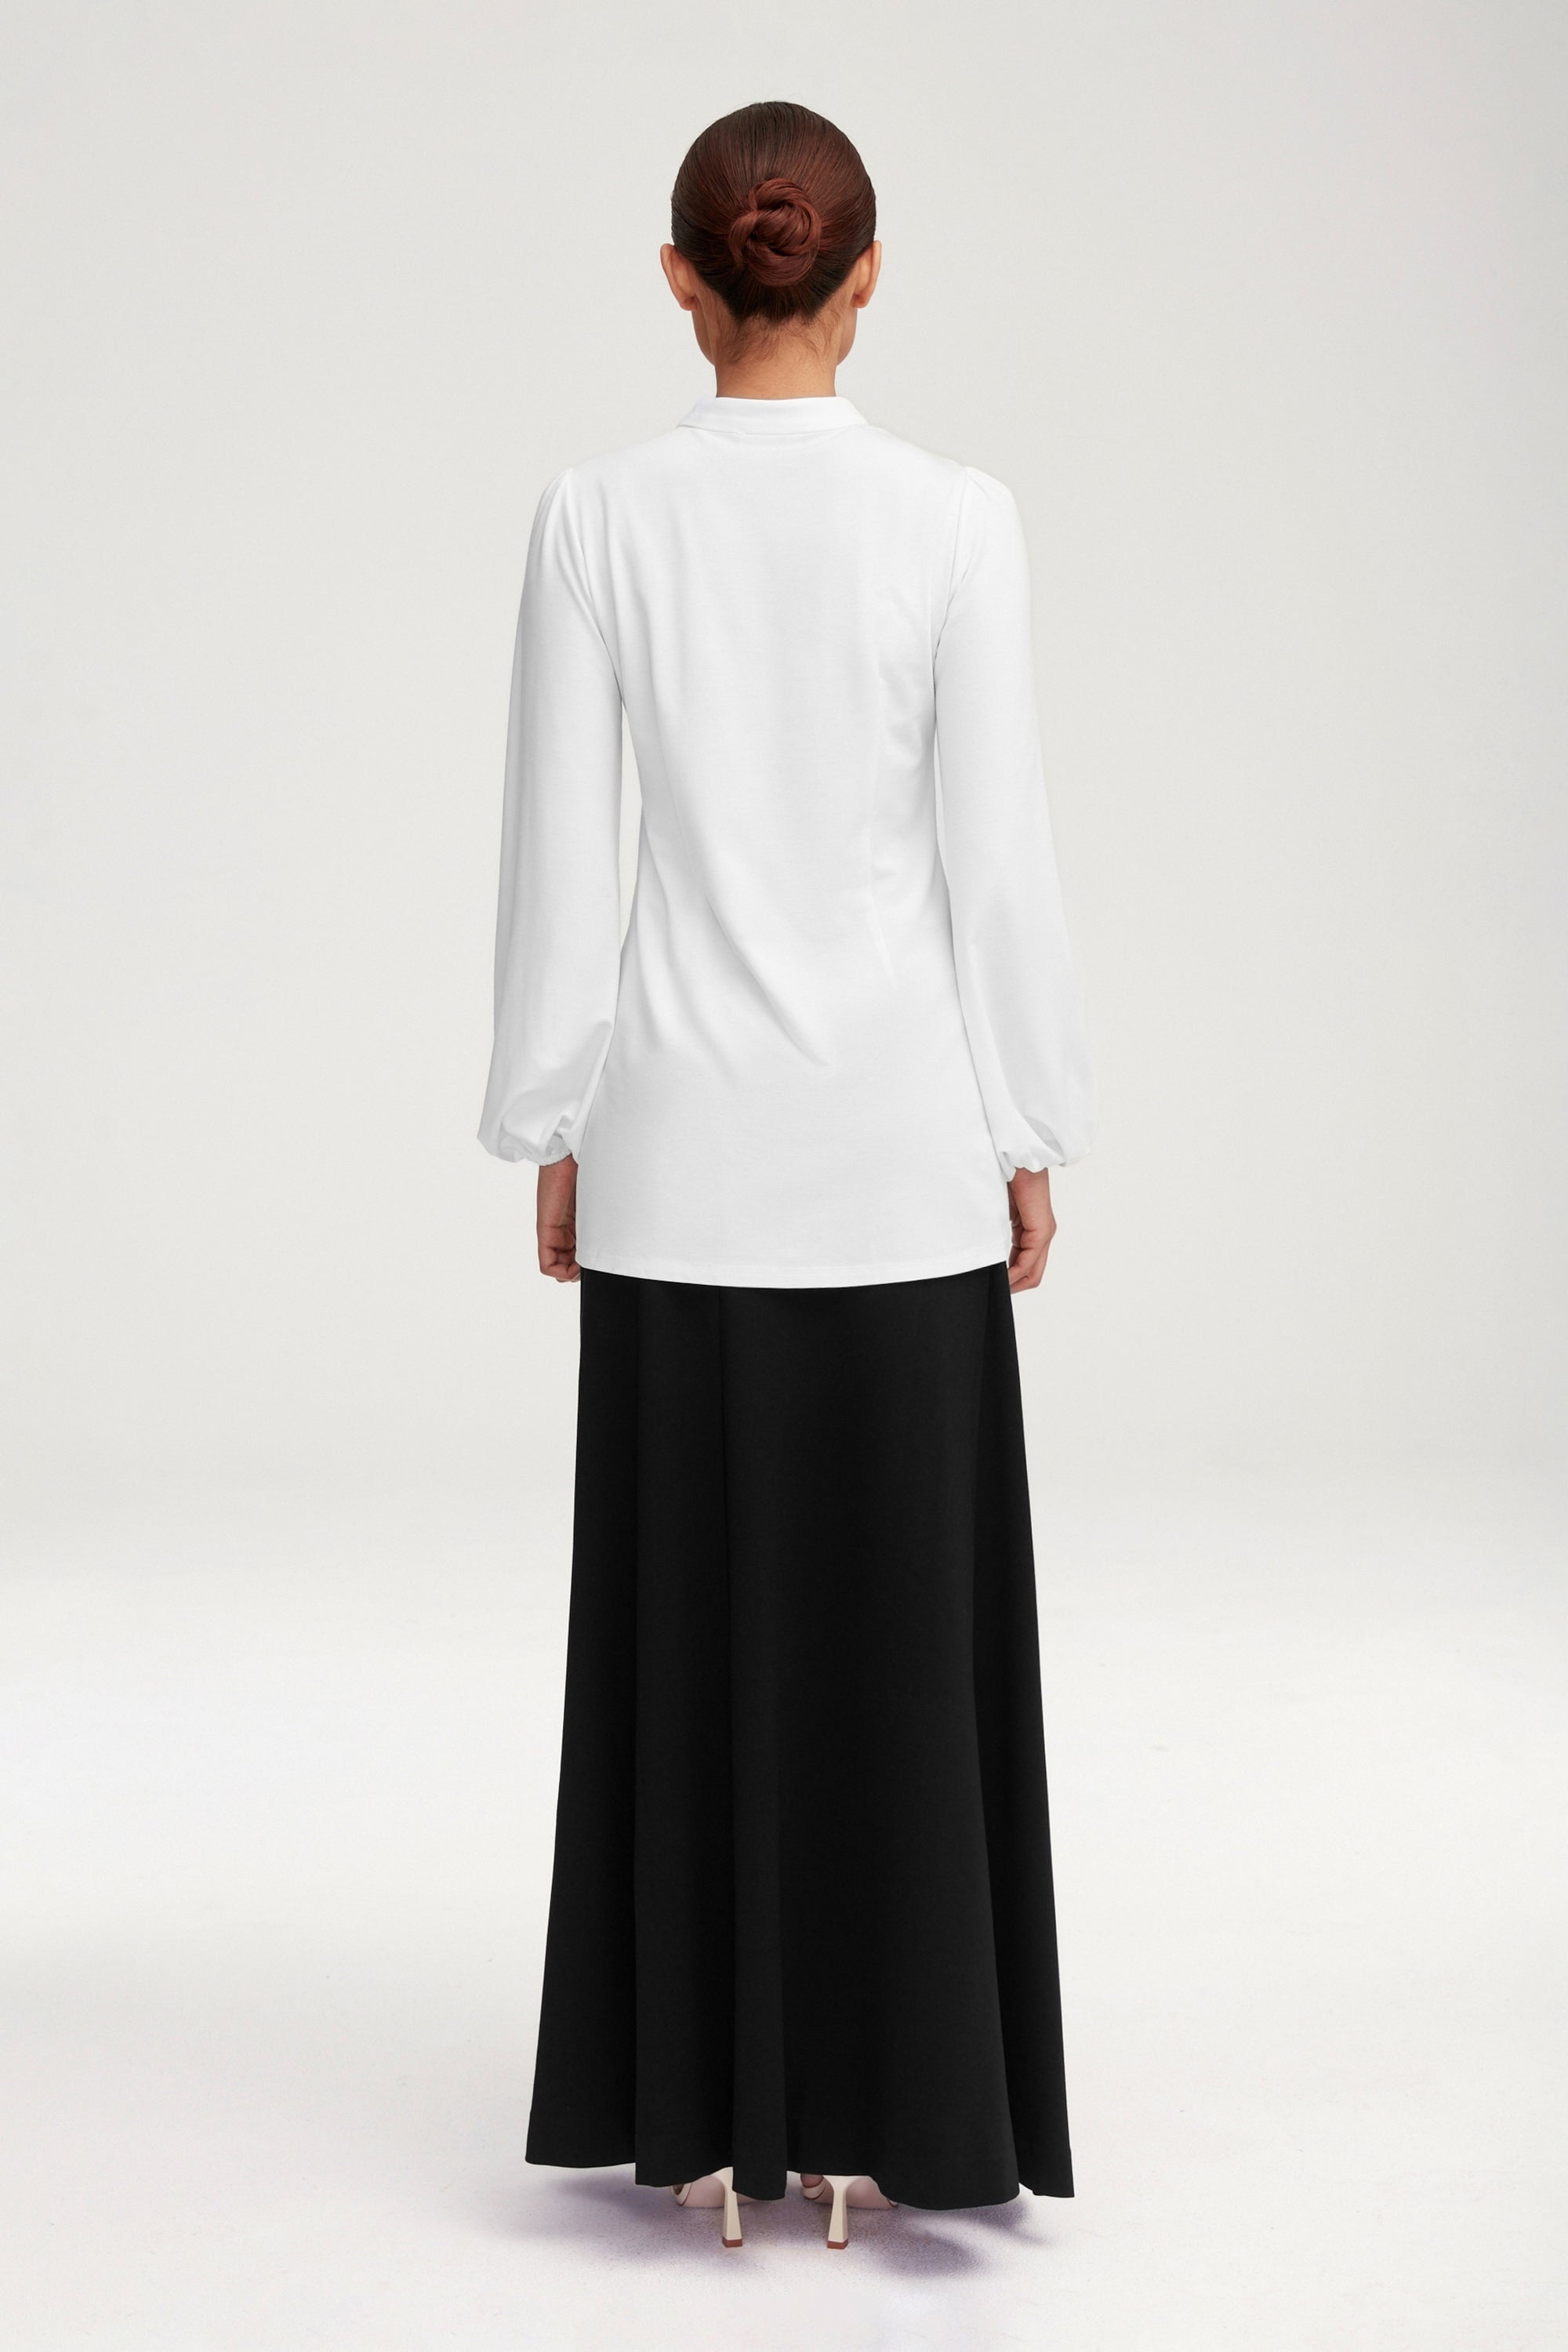 Rayana Jersey Button Down Top - White Clothing Veiled 